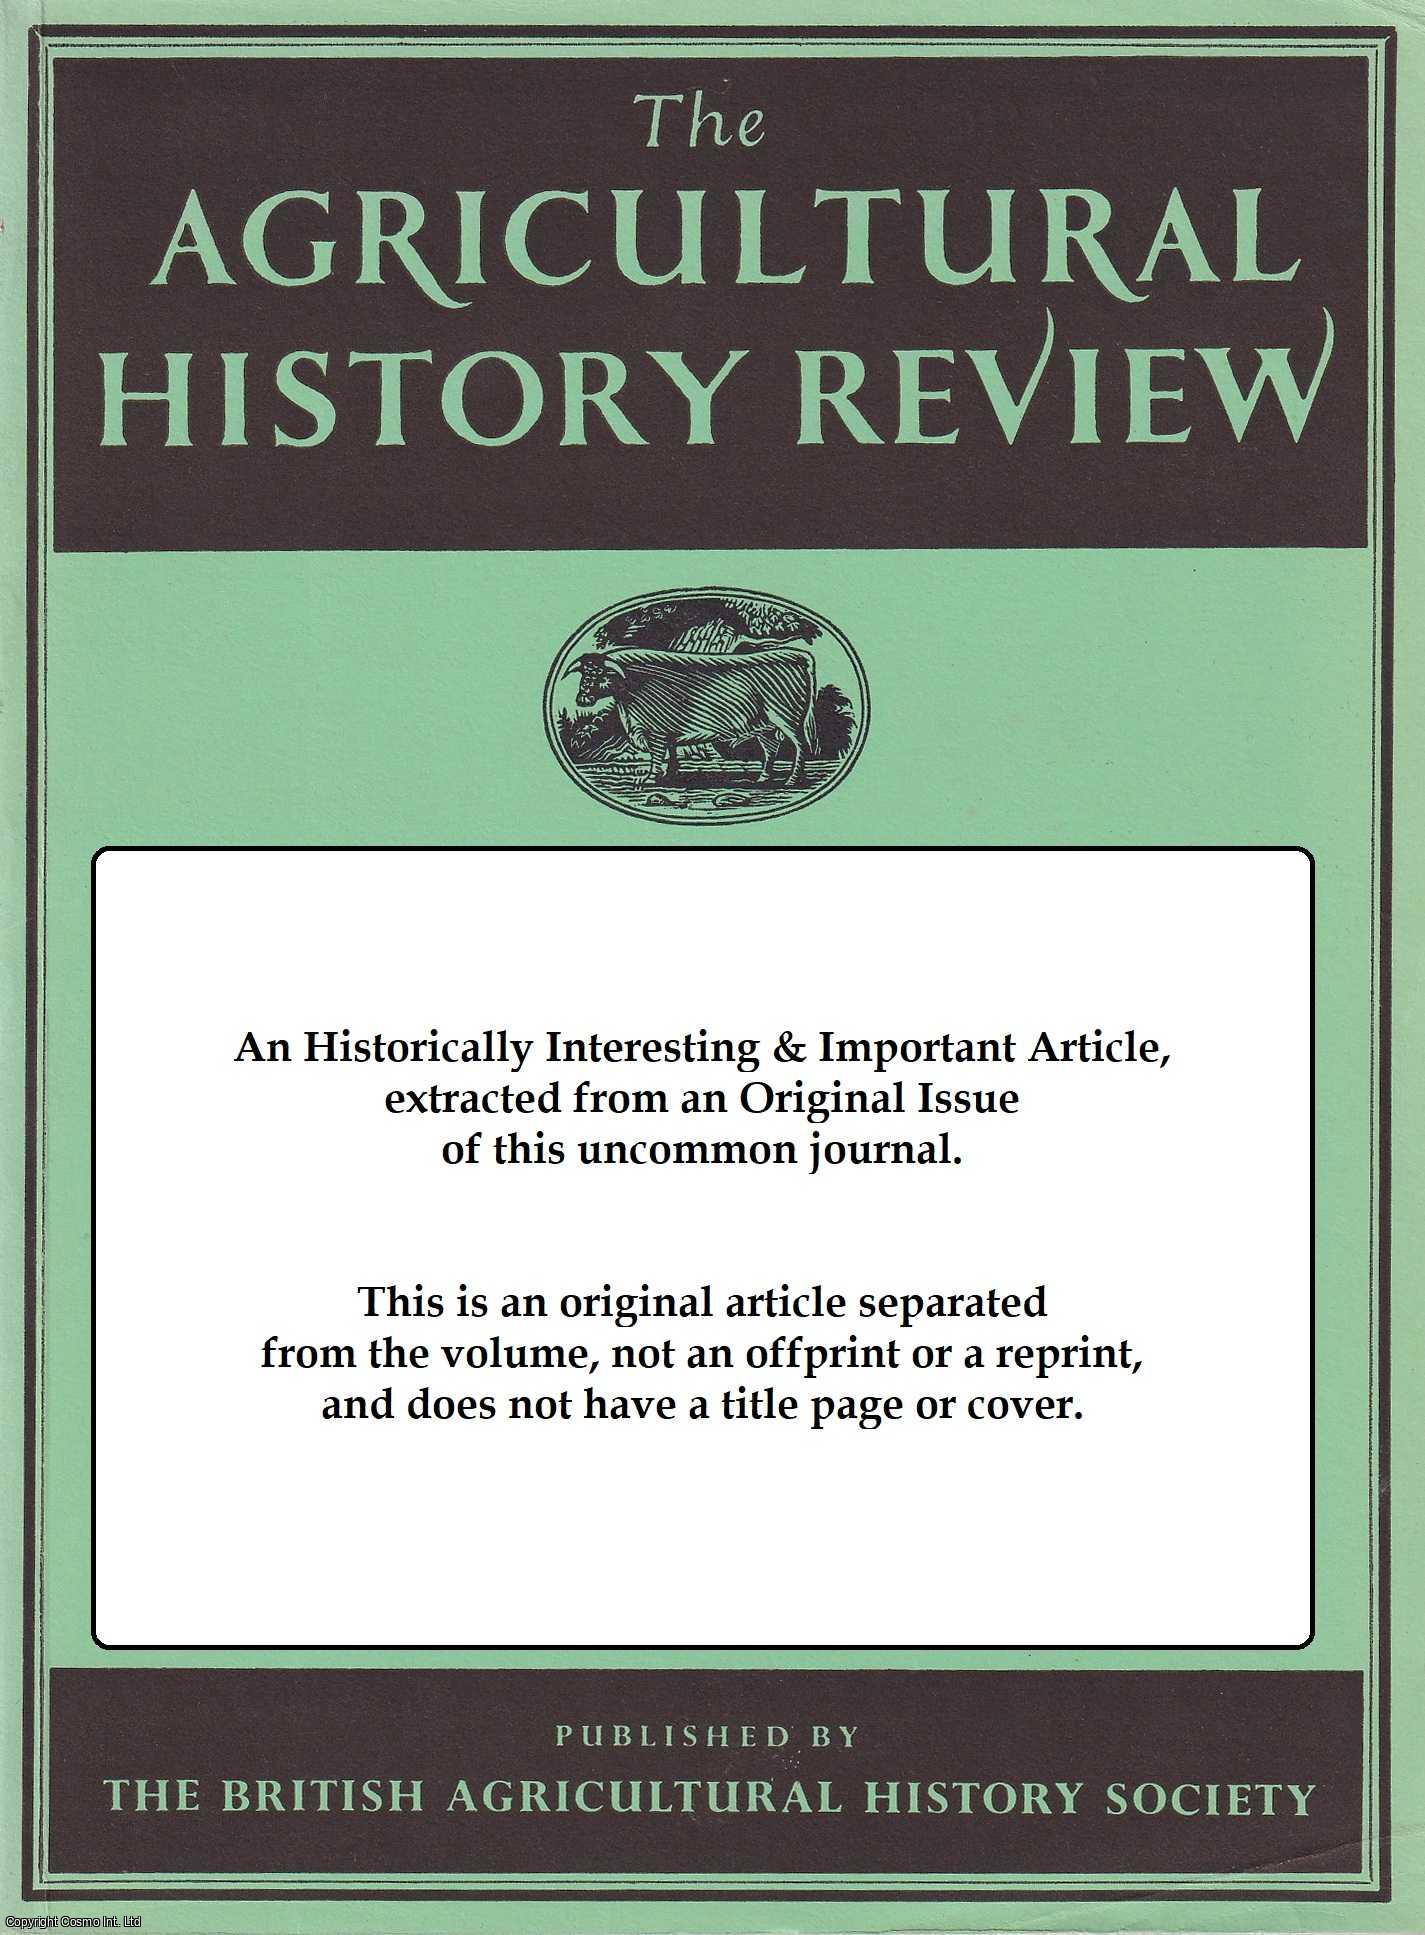 J.M. Lindsay - Forestry & Agriculture in the Scottish Highlands, 1700-1850 : a problem in Estate Management. An original article from the Agricultural History Review, 1977.